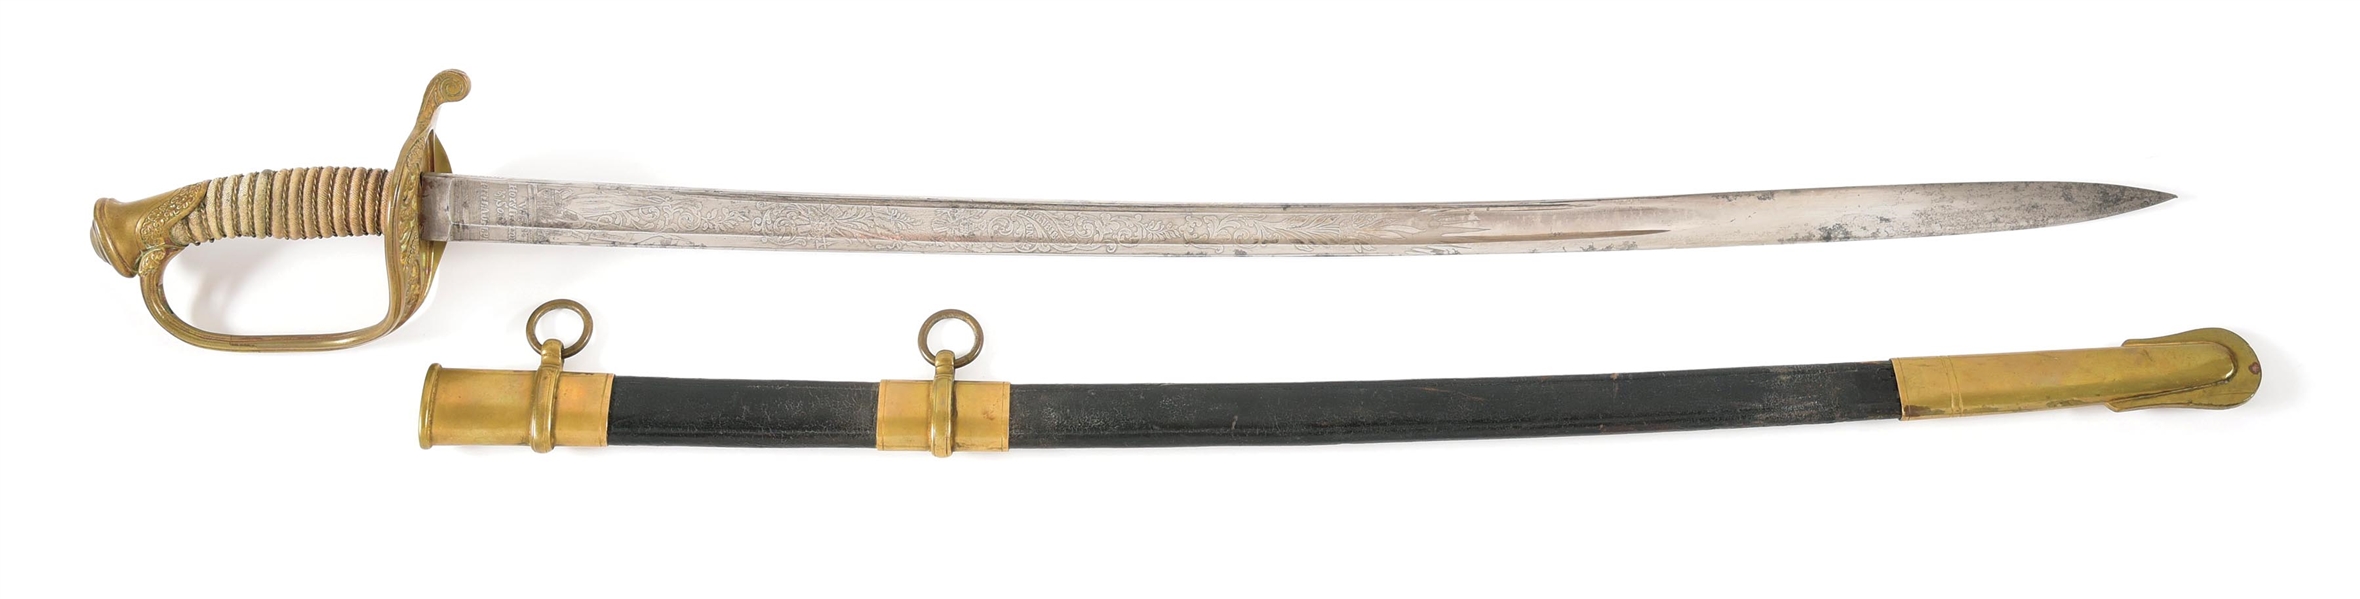 US CIVIL WAR M1850 FOOT OFFICERS SWORD WITH LEATHER SCABBARD. 